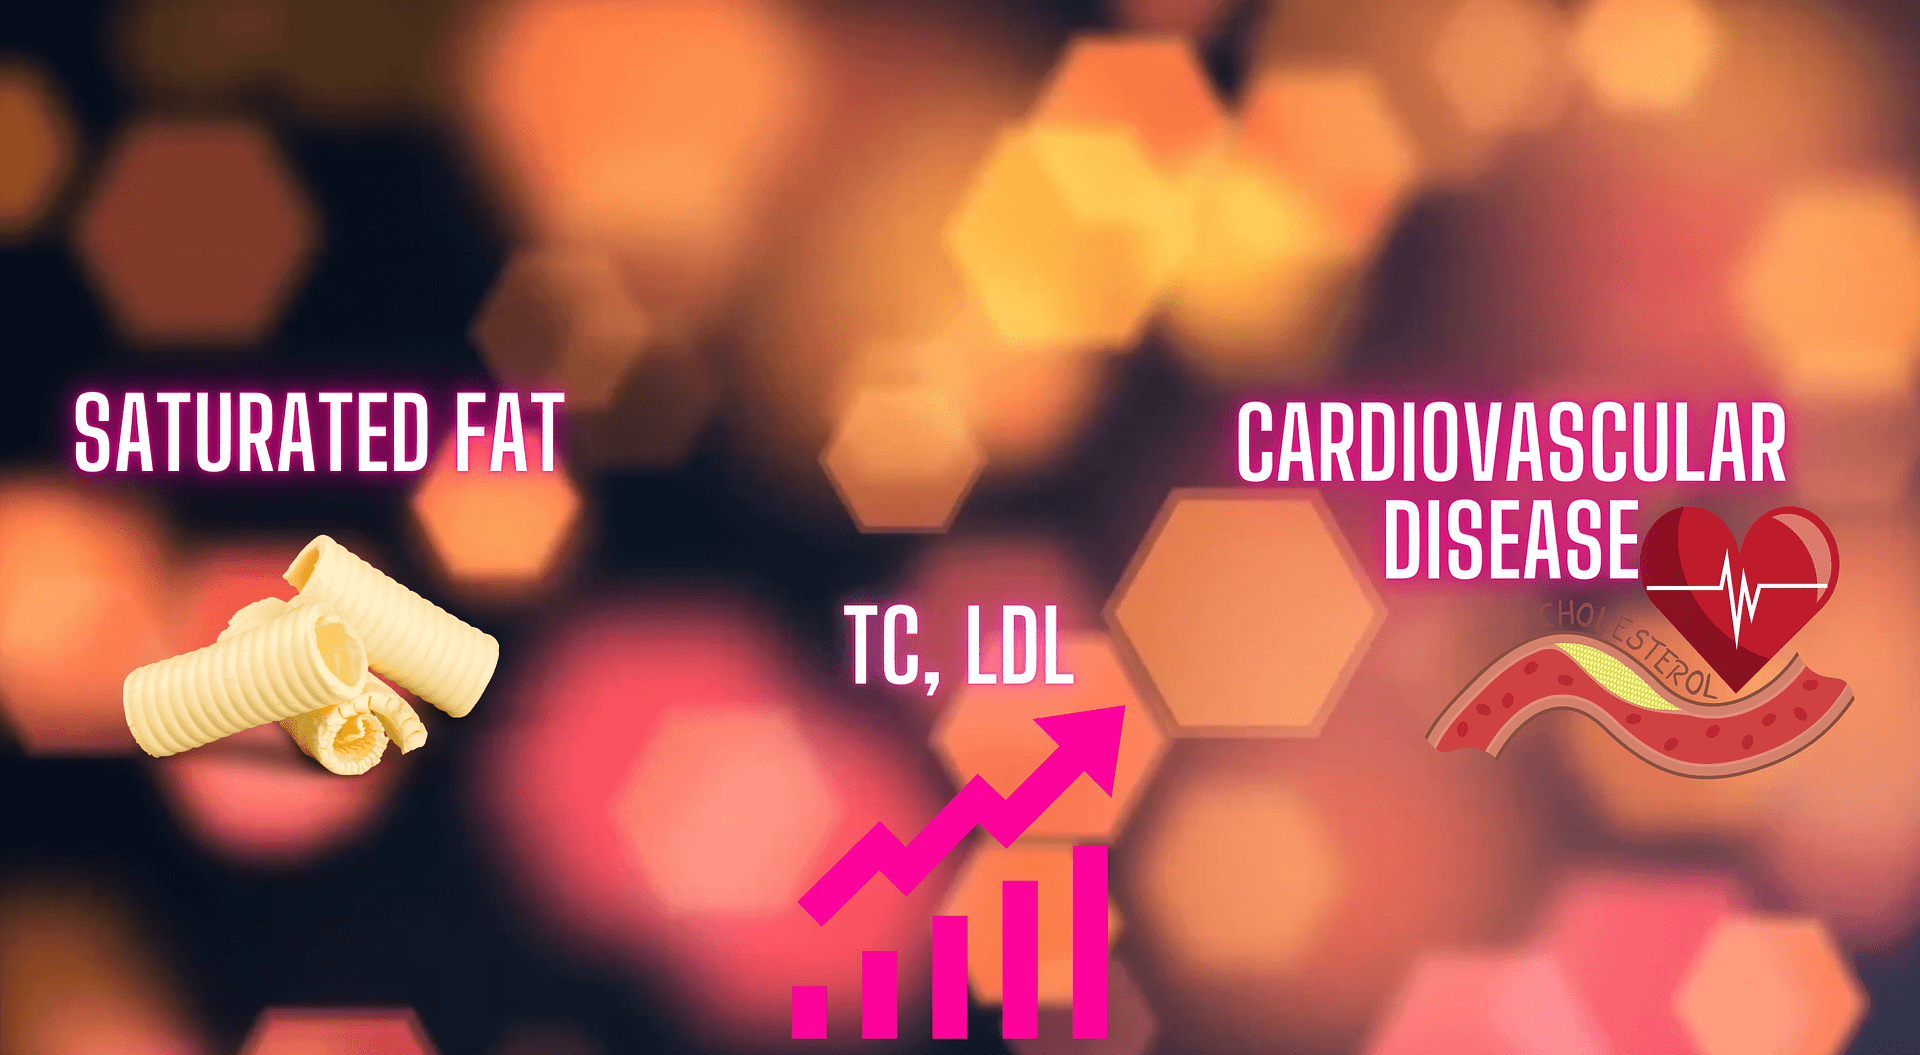 The second nutrition myth - Saturated fat is unhealthy, it increases the LDL (bad cholesterol) and increases the risk of cardiovascular disease.